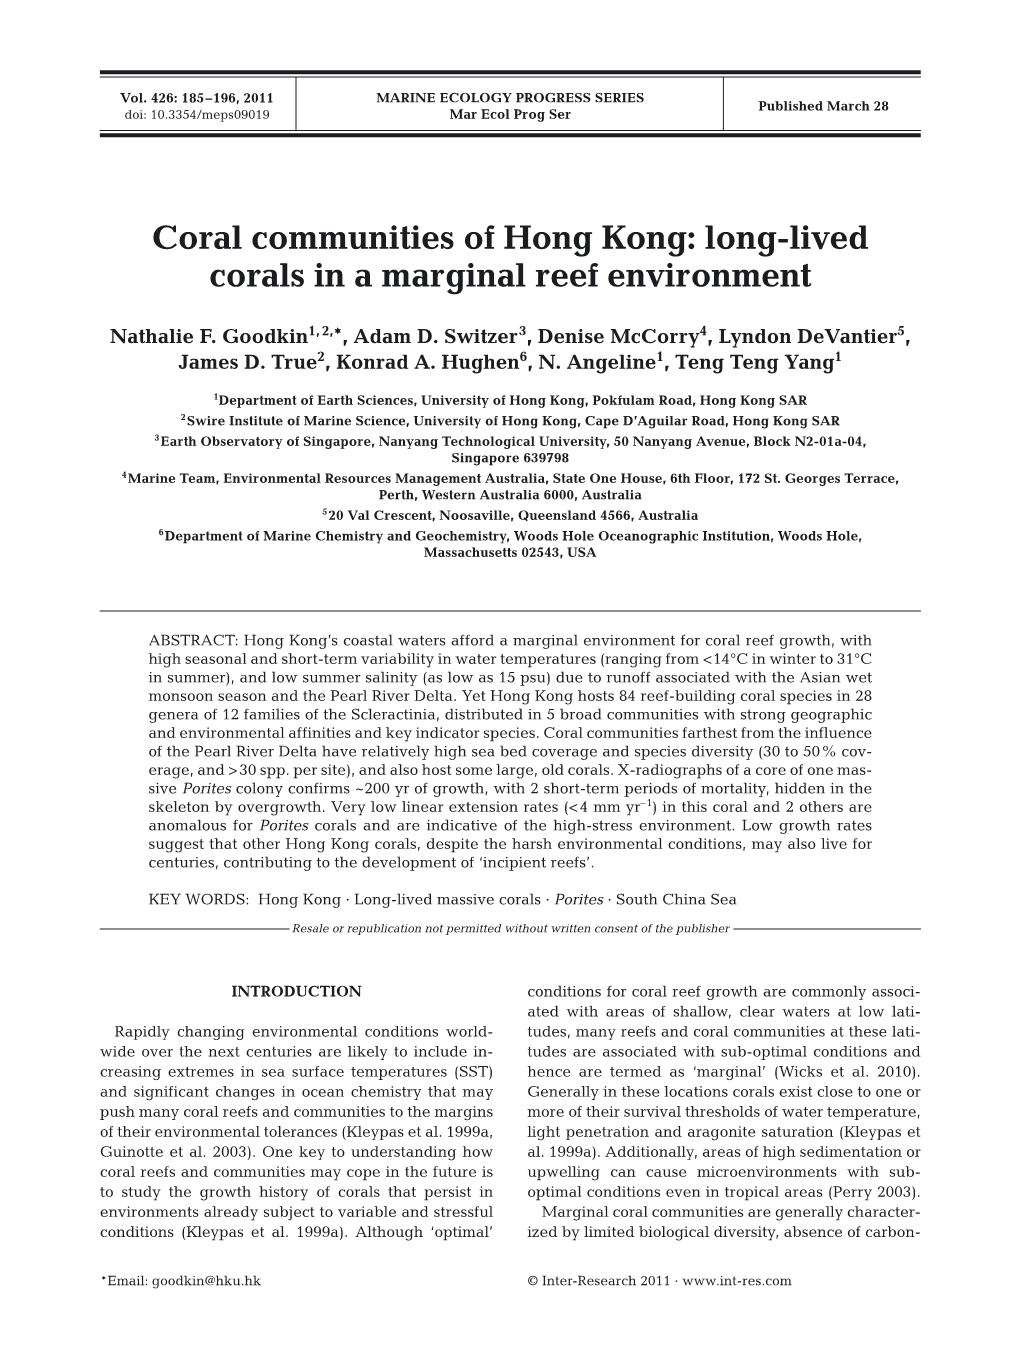 Coral Communities of Hong Kong: Long-Lived Corals in a Marginal Reef Environment